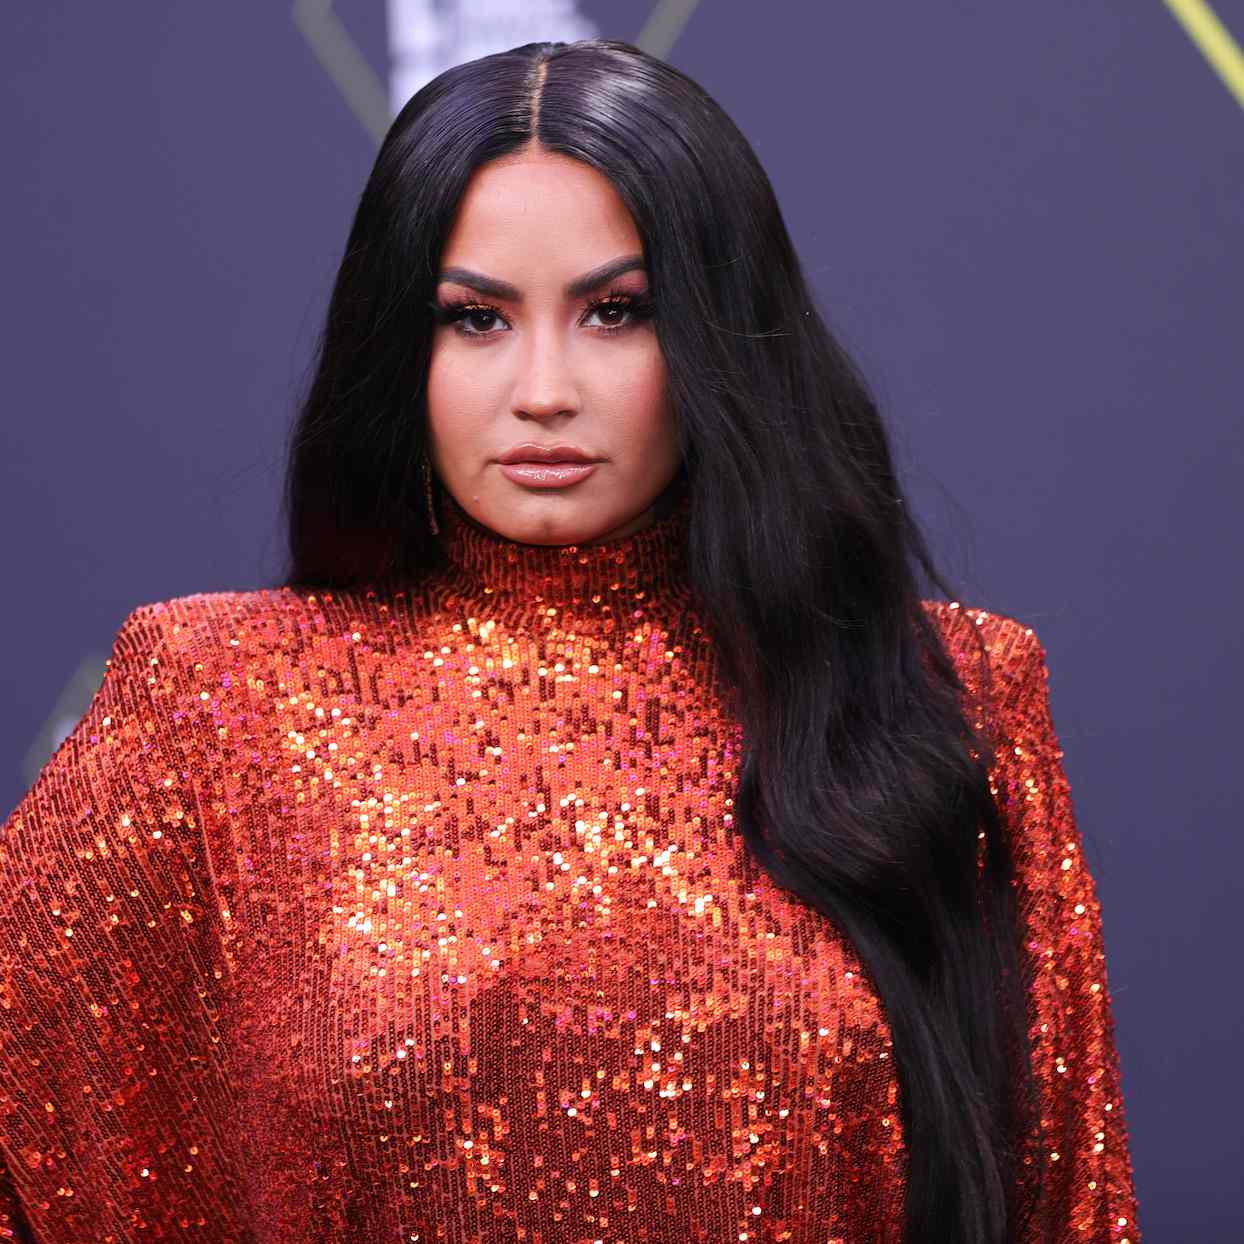 Demi Lovato Celebrated Their Stretch Marks with a Glittery Photoshoot